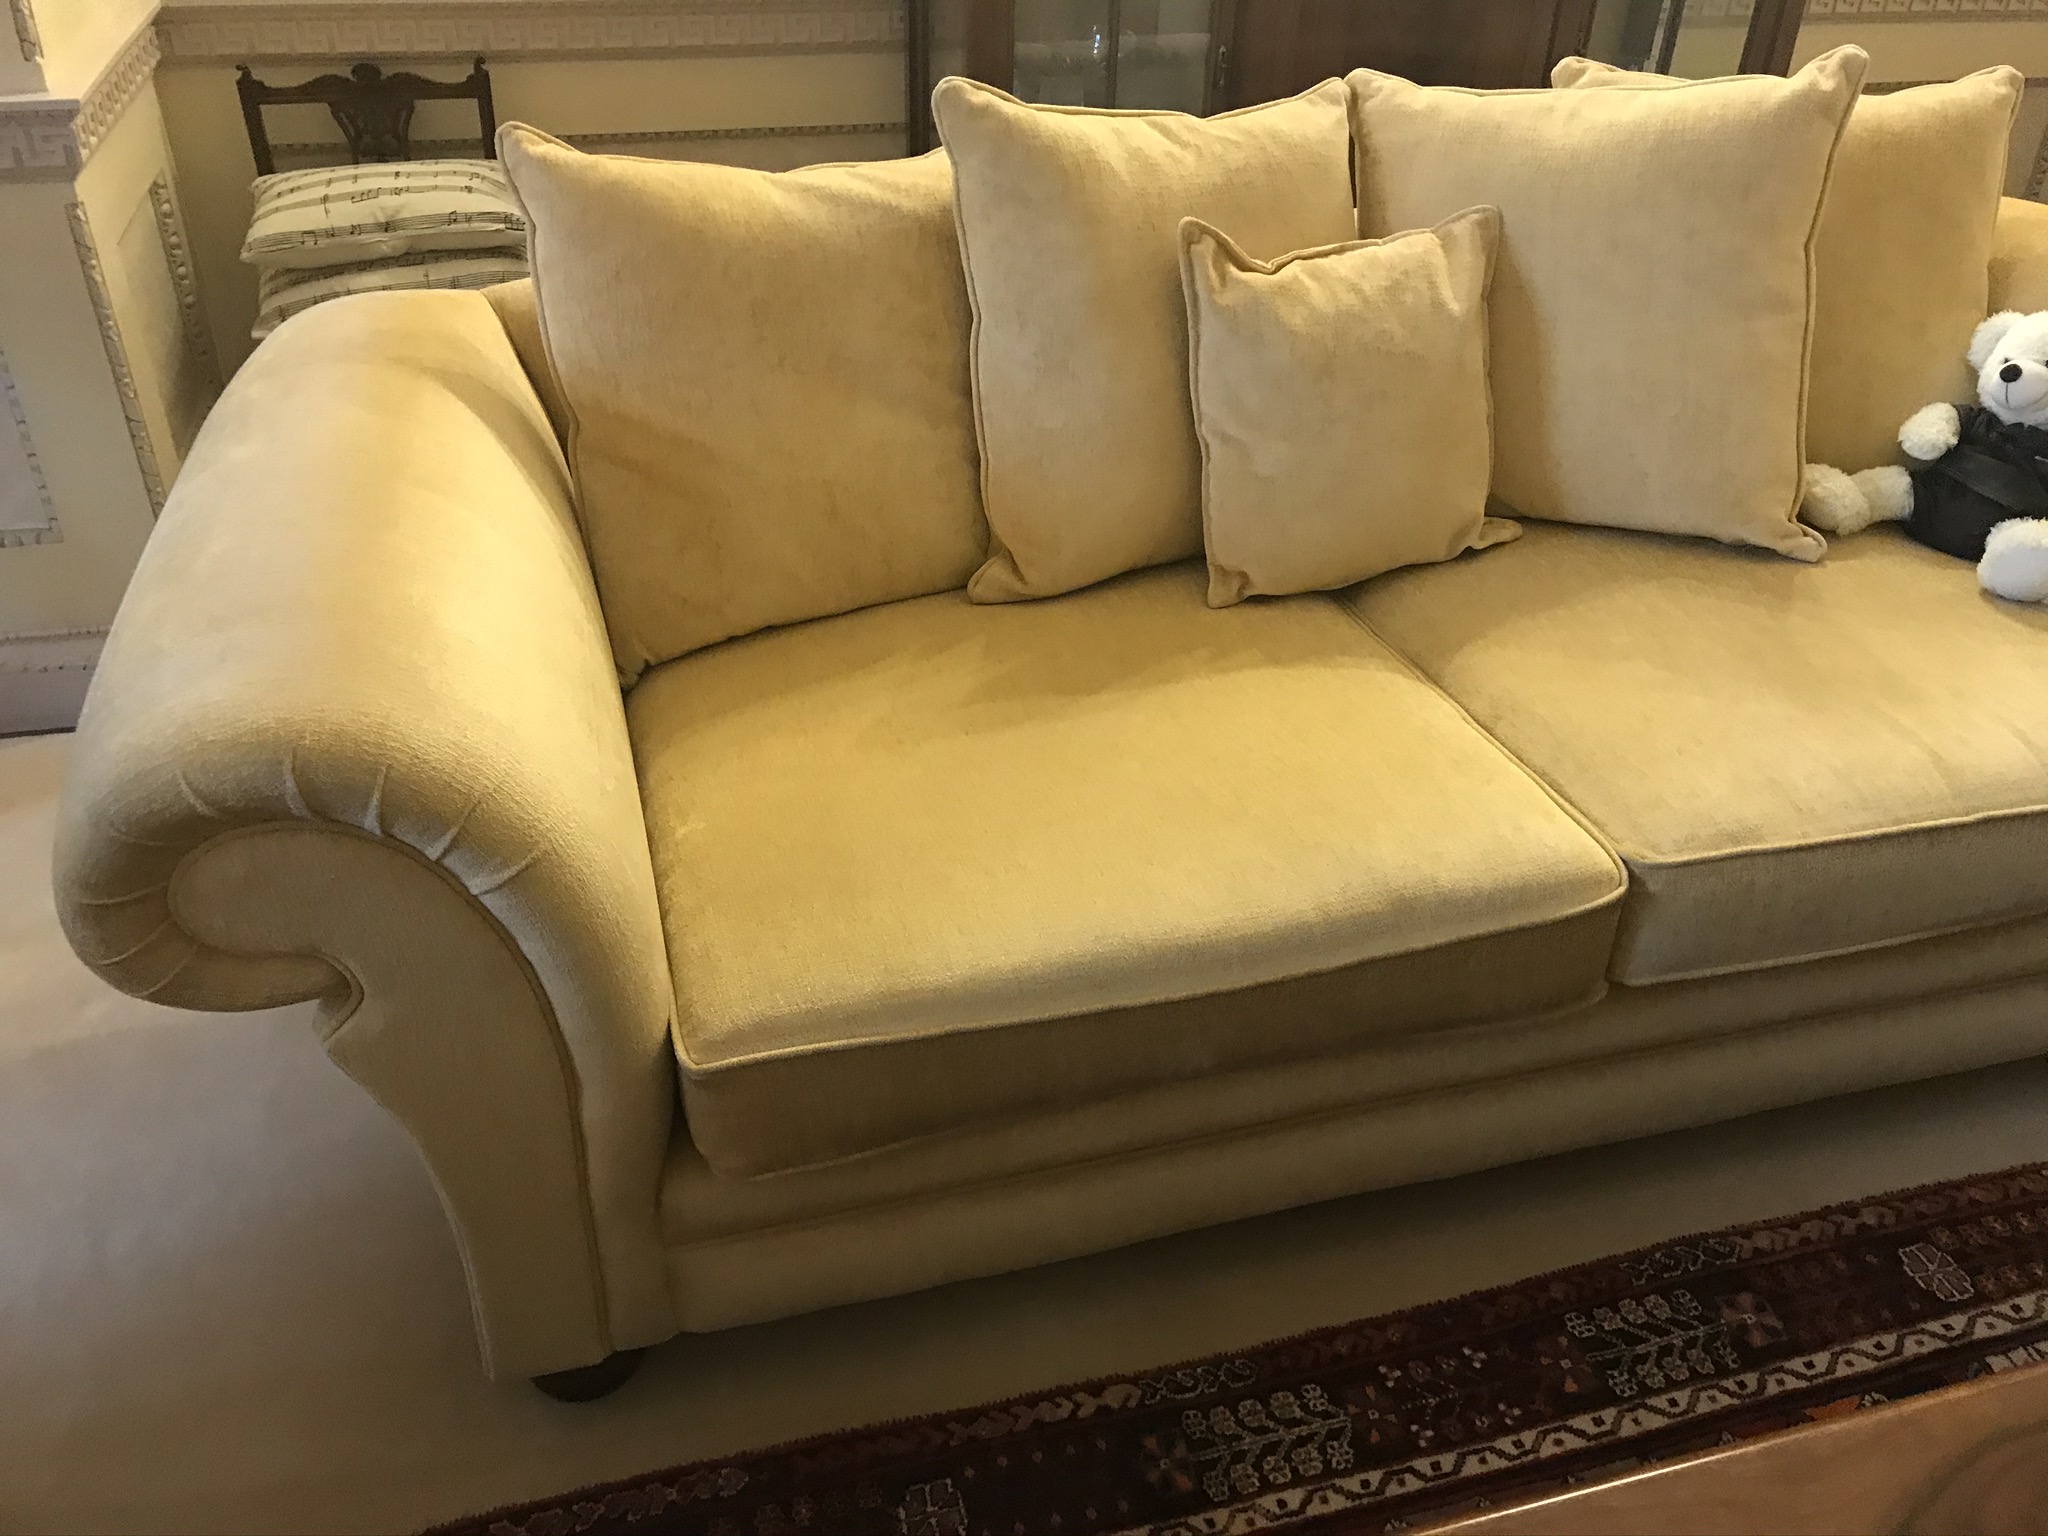 Large Light Gold Upholstered Classic Sofa - Image 2 of 6